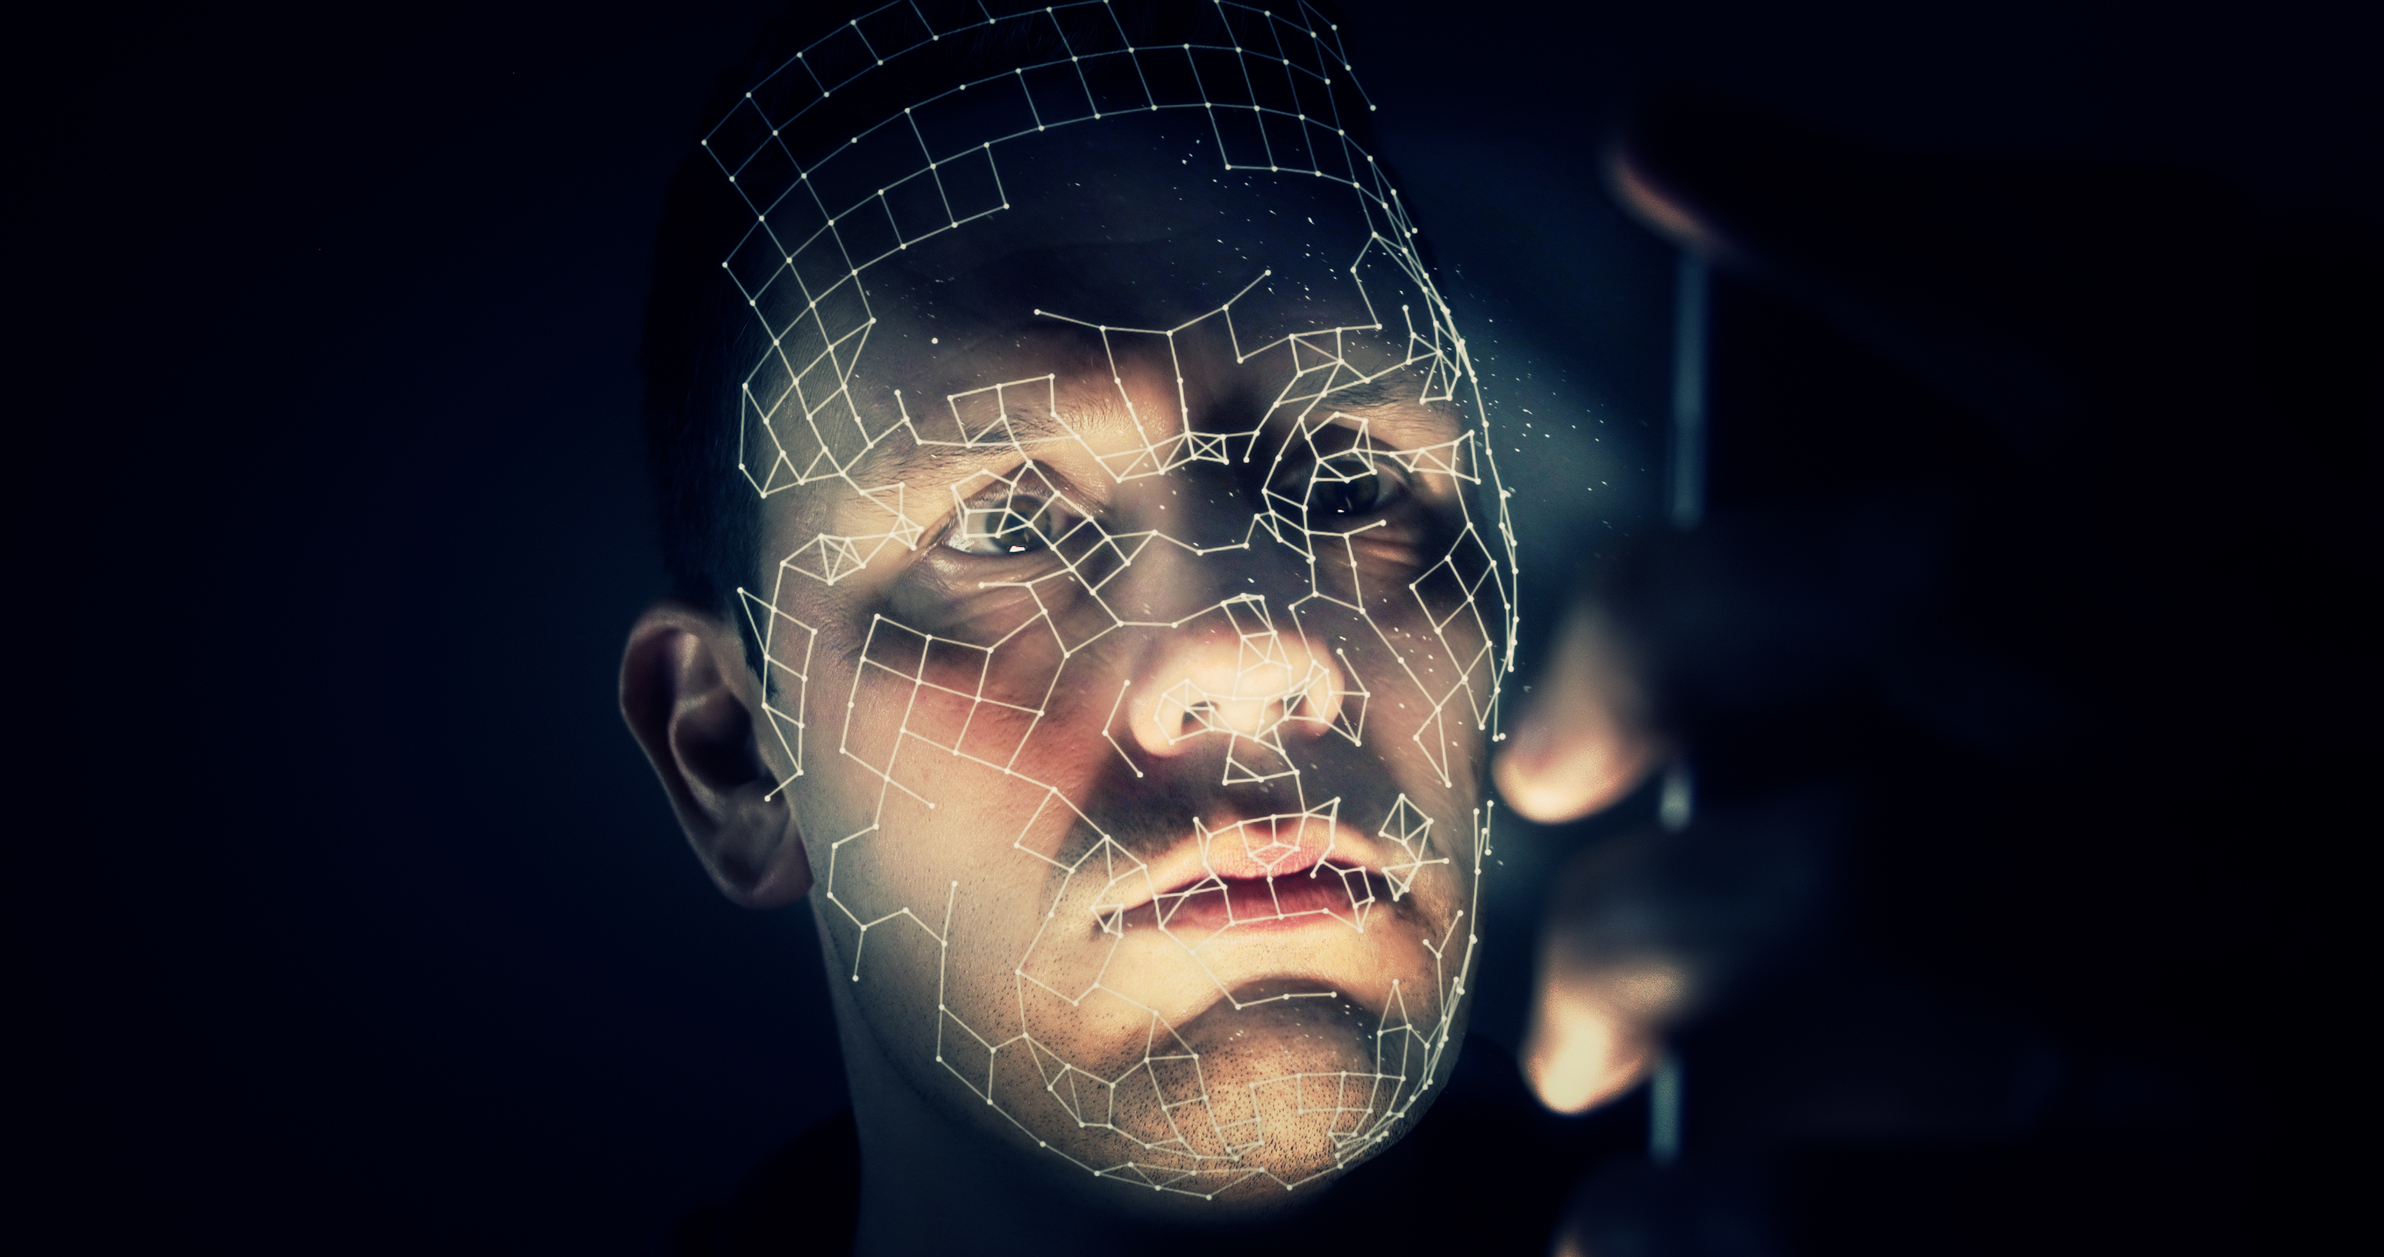 Article image for New facial recognition technology potentially dangerous in wrong hands